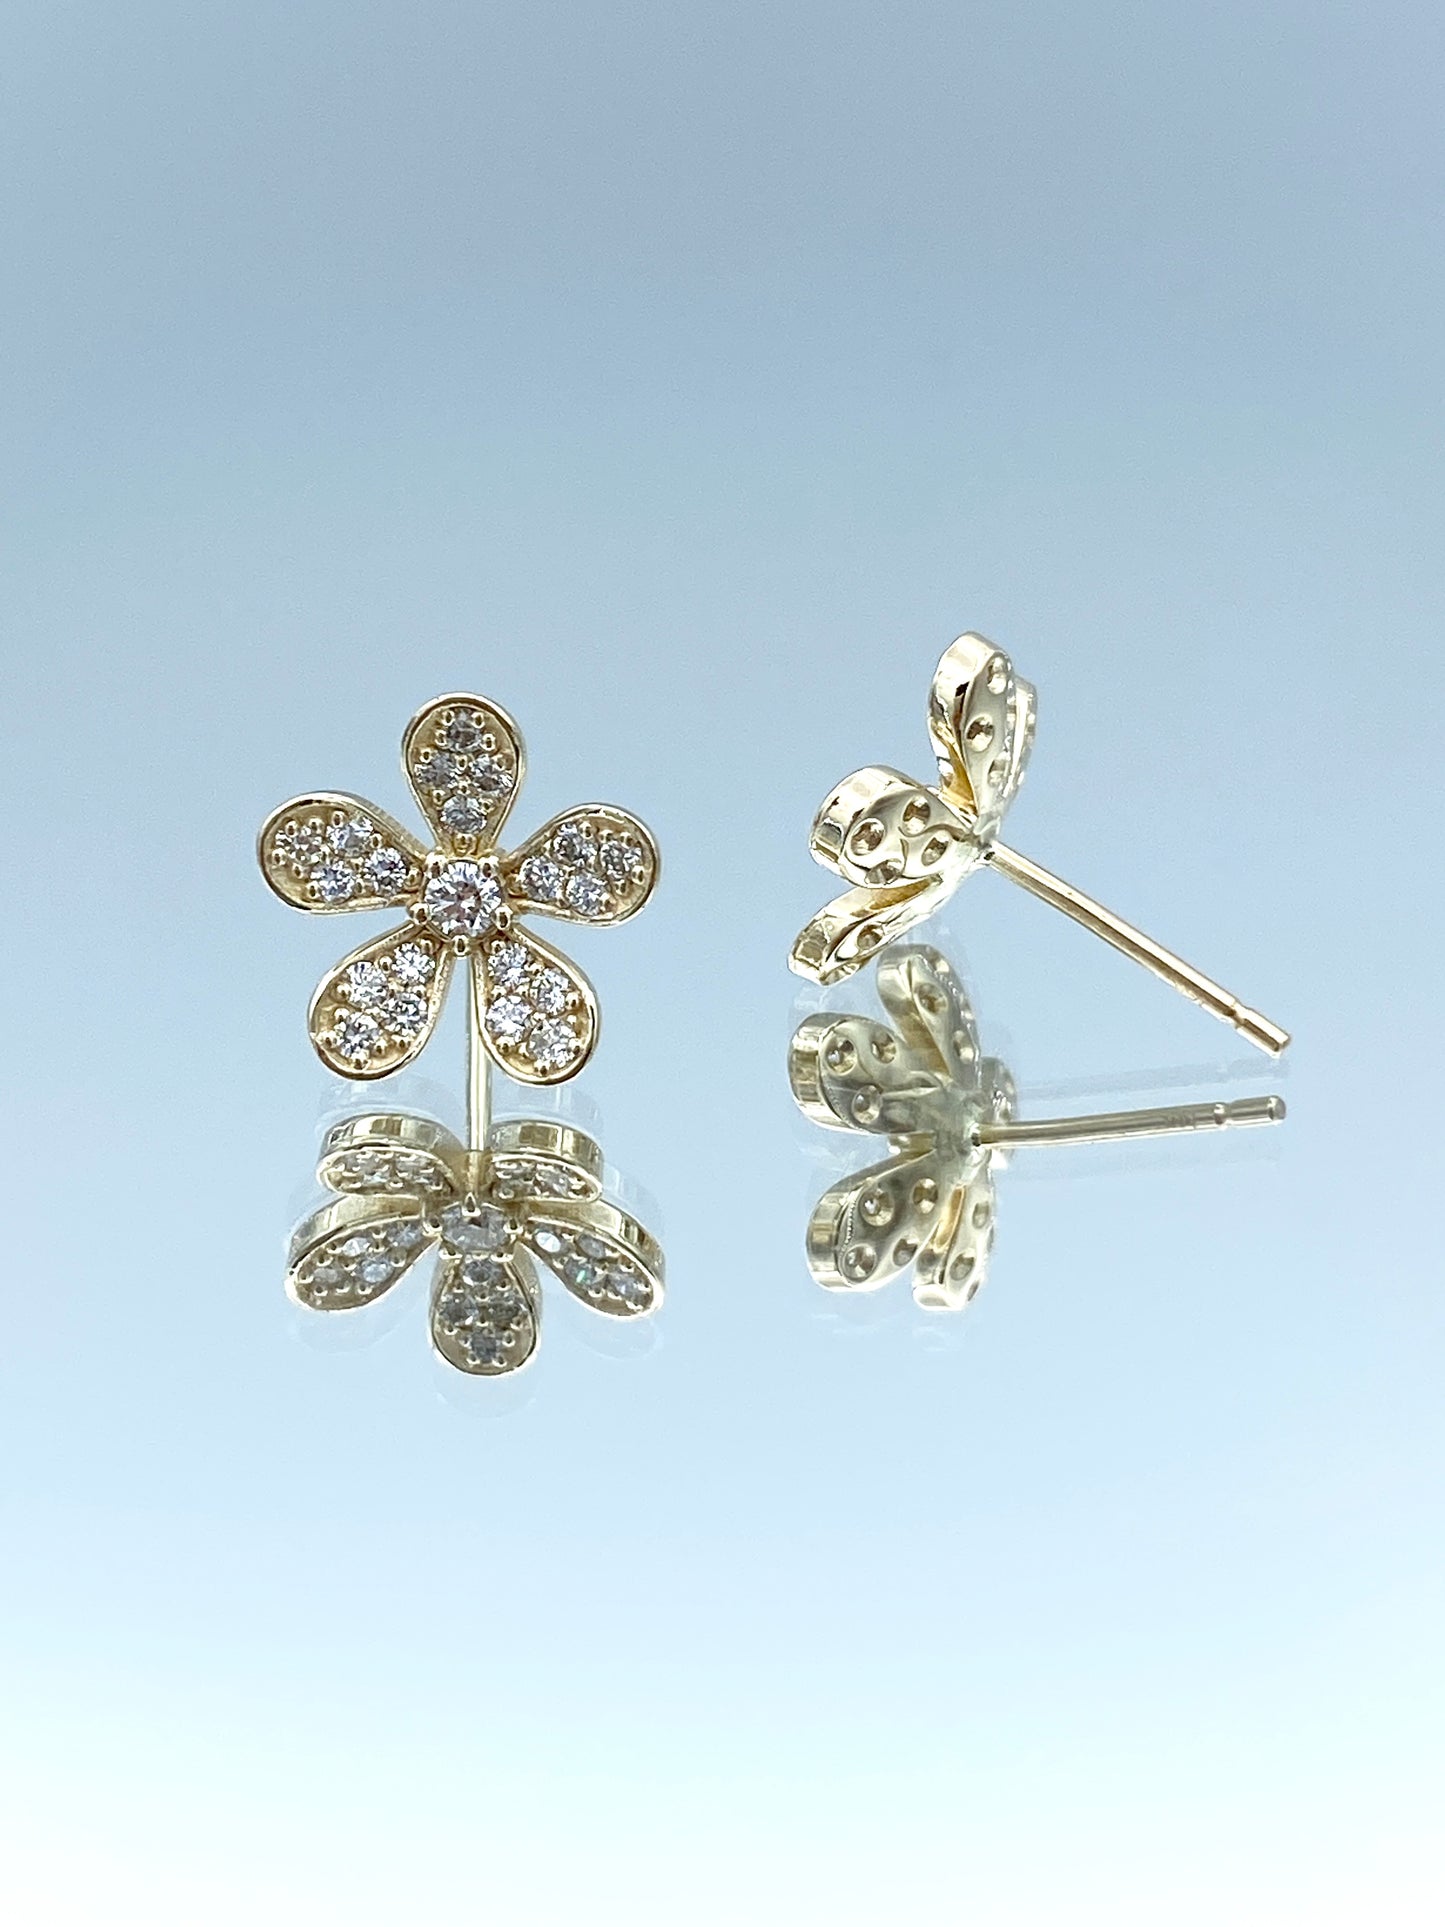 Floral Shape Diamond Stud Earrings in 14K Yellow Gold - L and L Jewelry